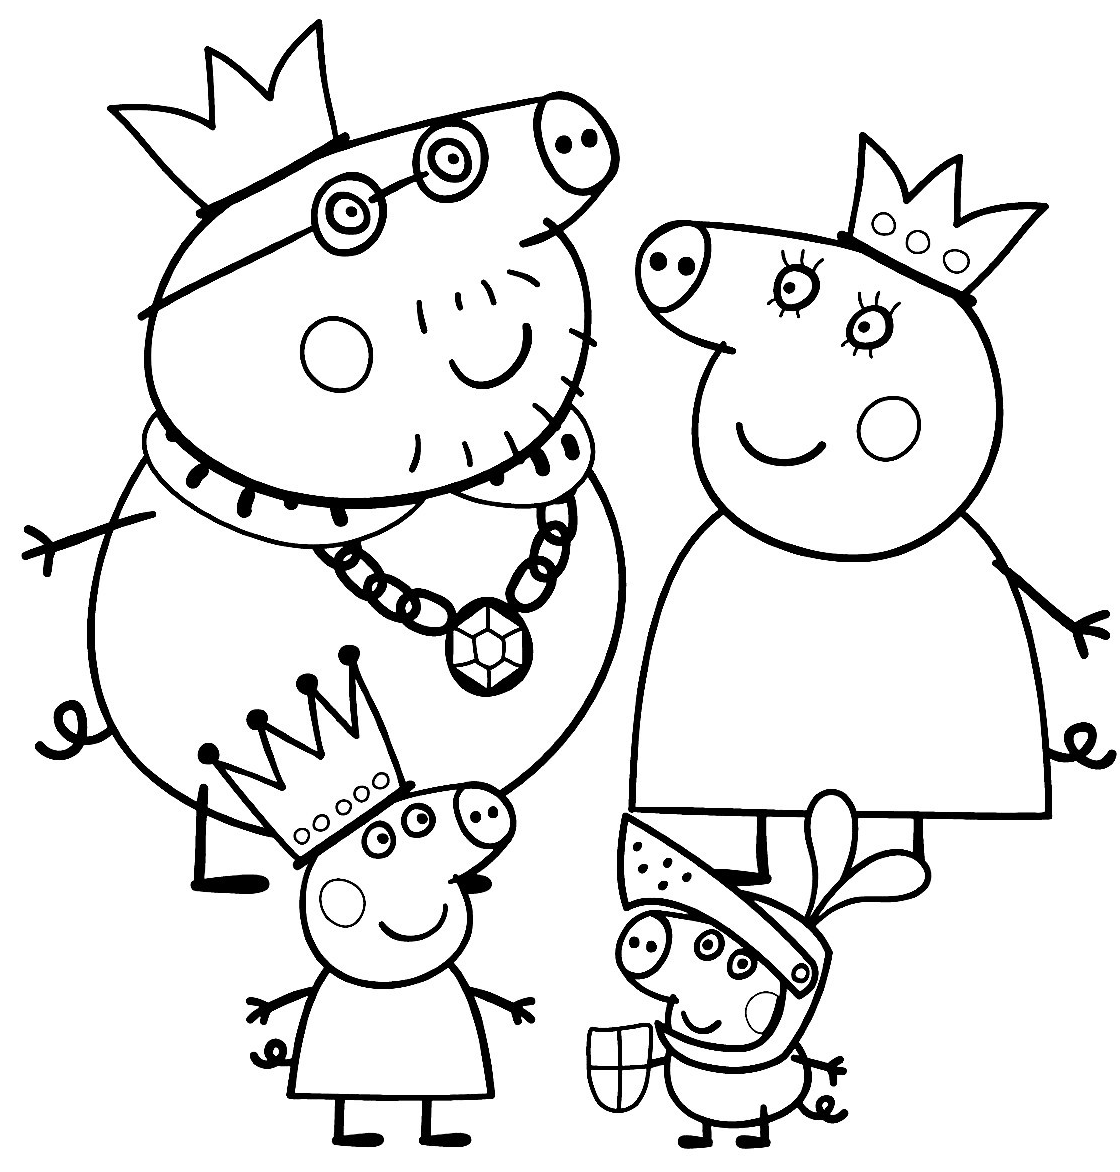 Peppa Pig Coloring Page Printable Pdf Peppa Pig Colouring Pages